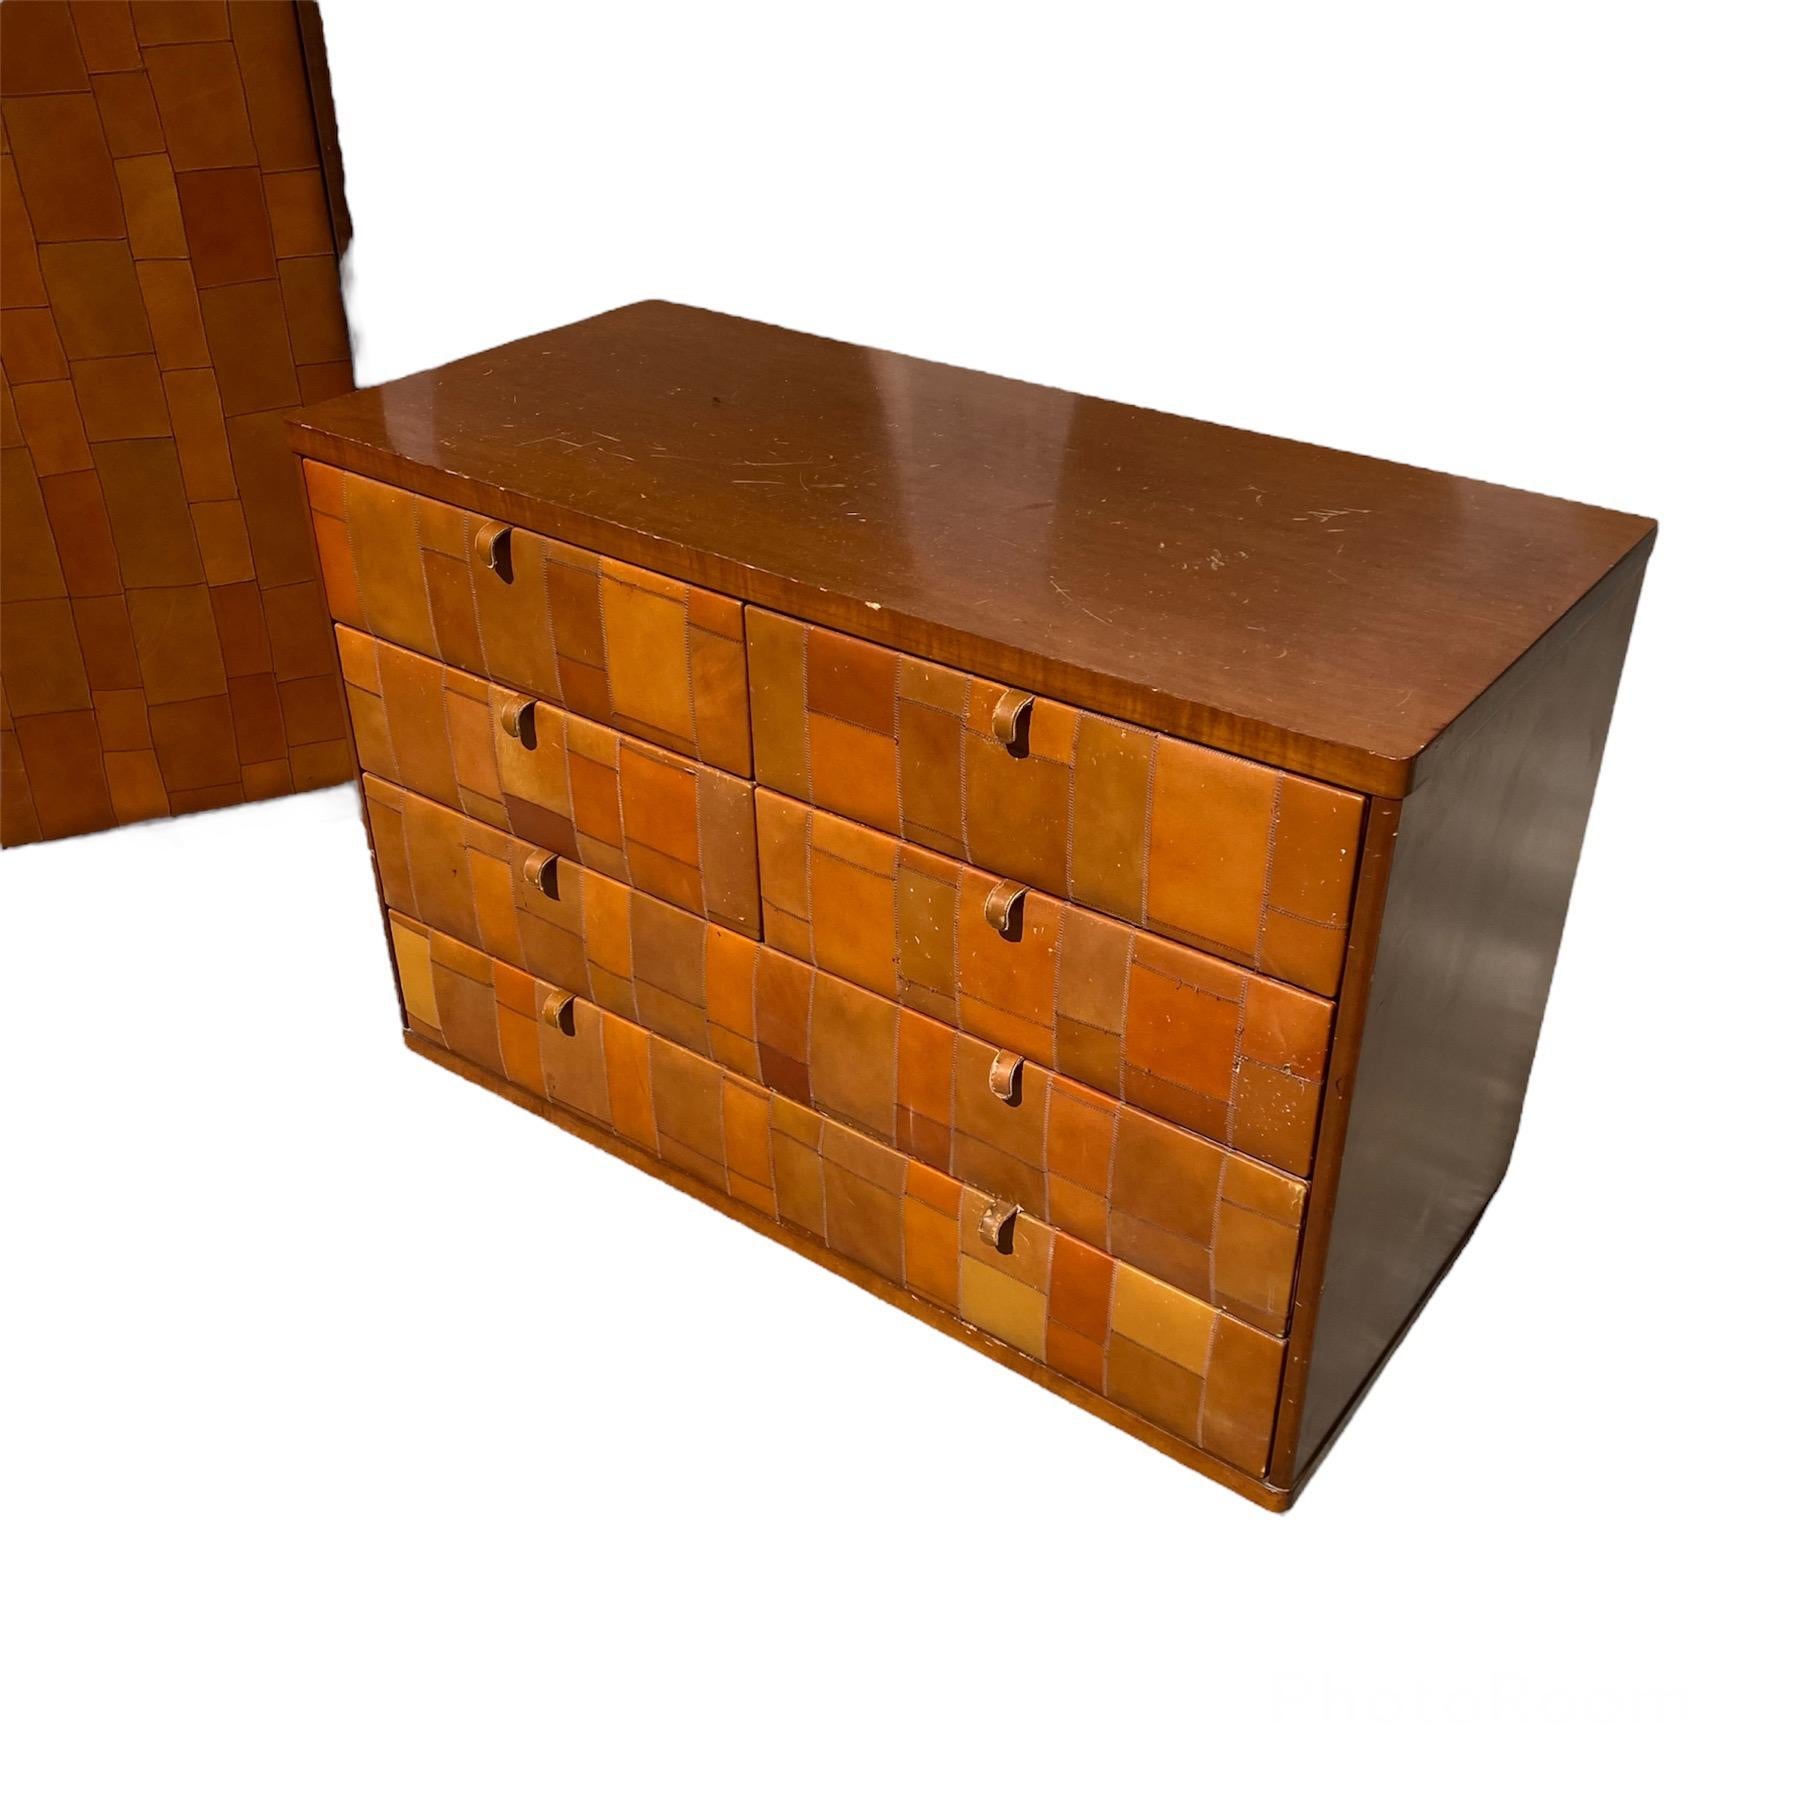 Animal Skin Chest Of Drawers in Pecary leather by Tito Agnoli for Caleido\Poltrona Frau For Sale